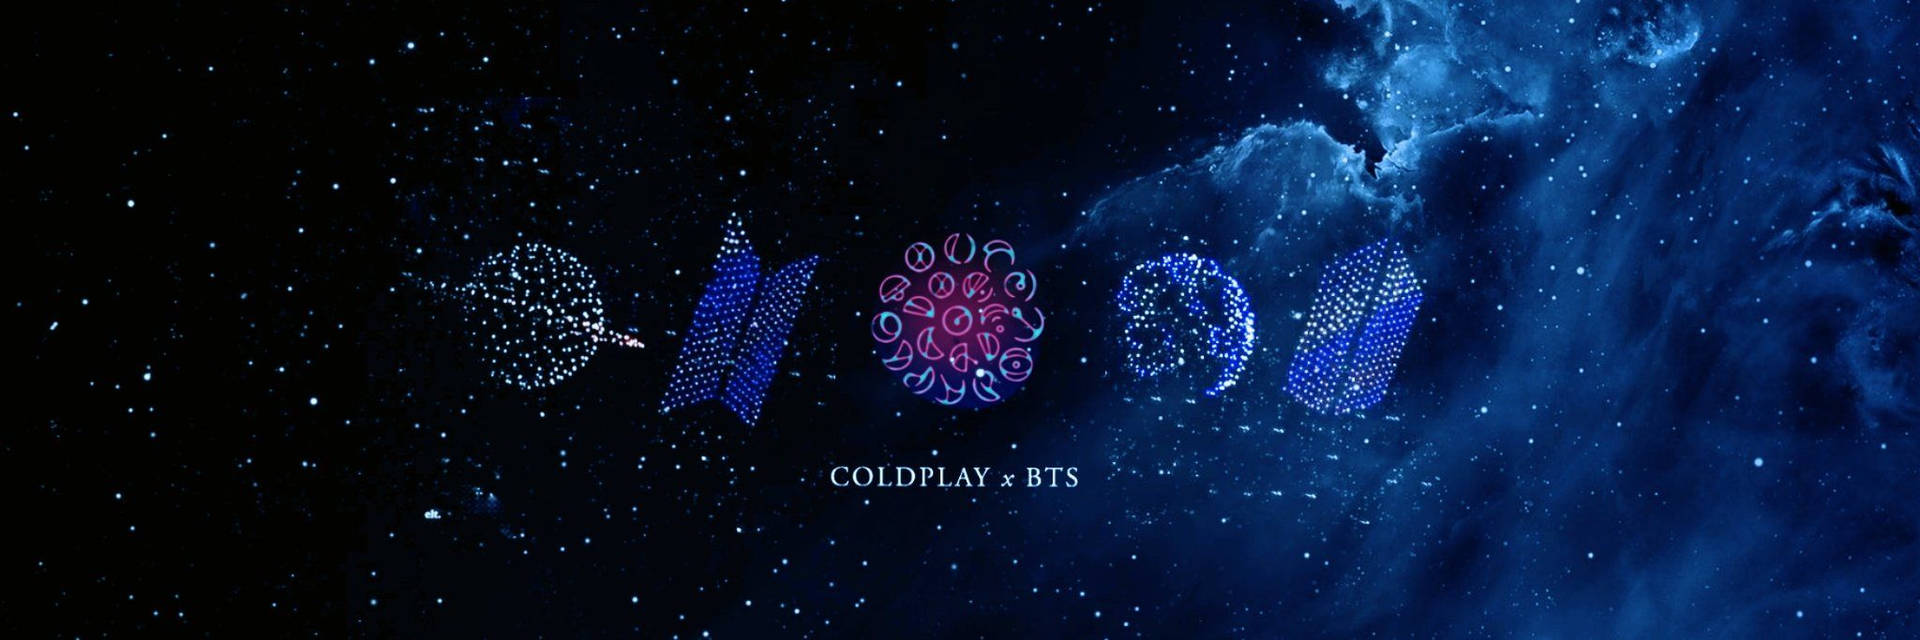 Coldplay And Bts With Stars Twitter Header Background